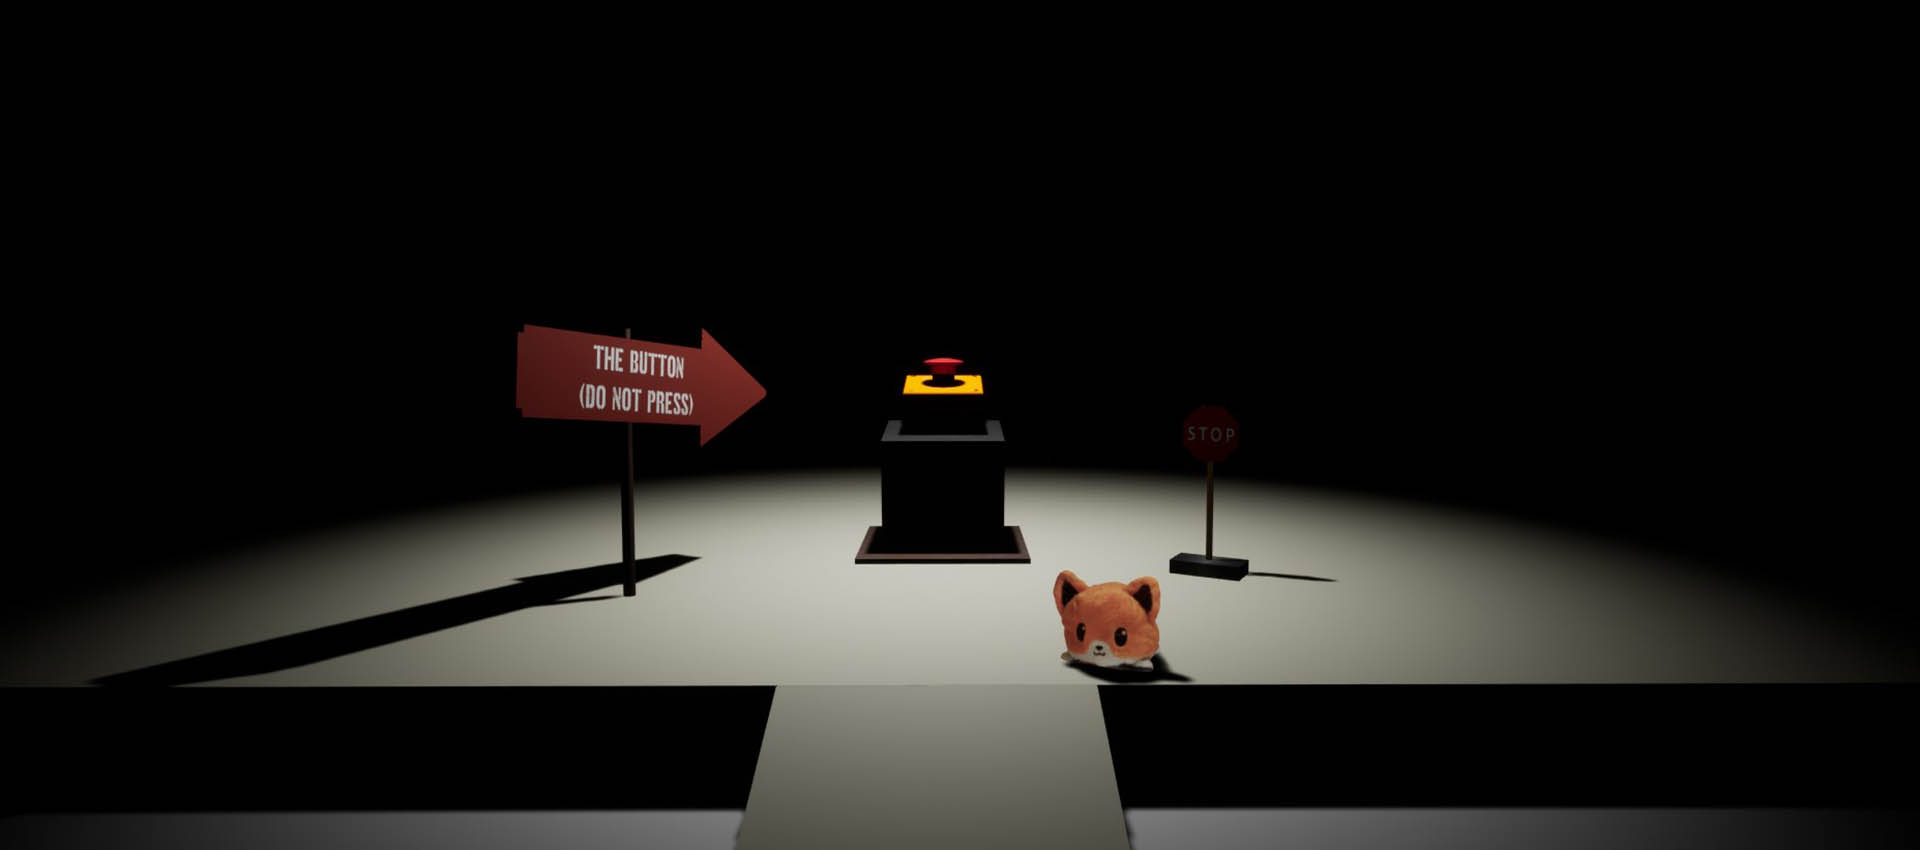 A new "Stanley Parable" inspired game gets demo today - "Do Not Press The Button (To Delete The Multiverse)"